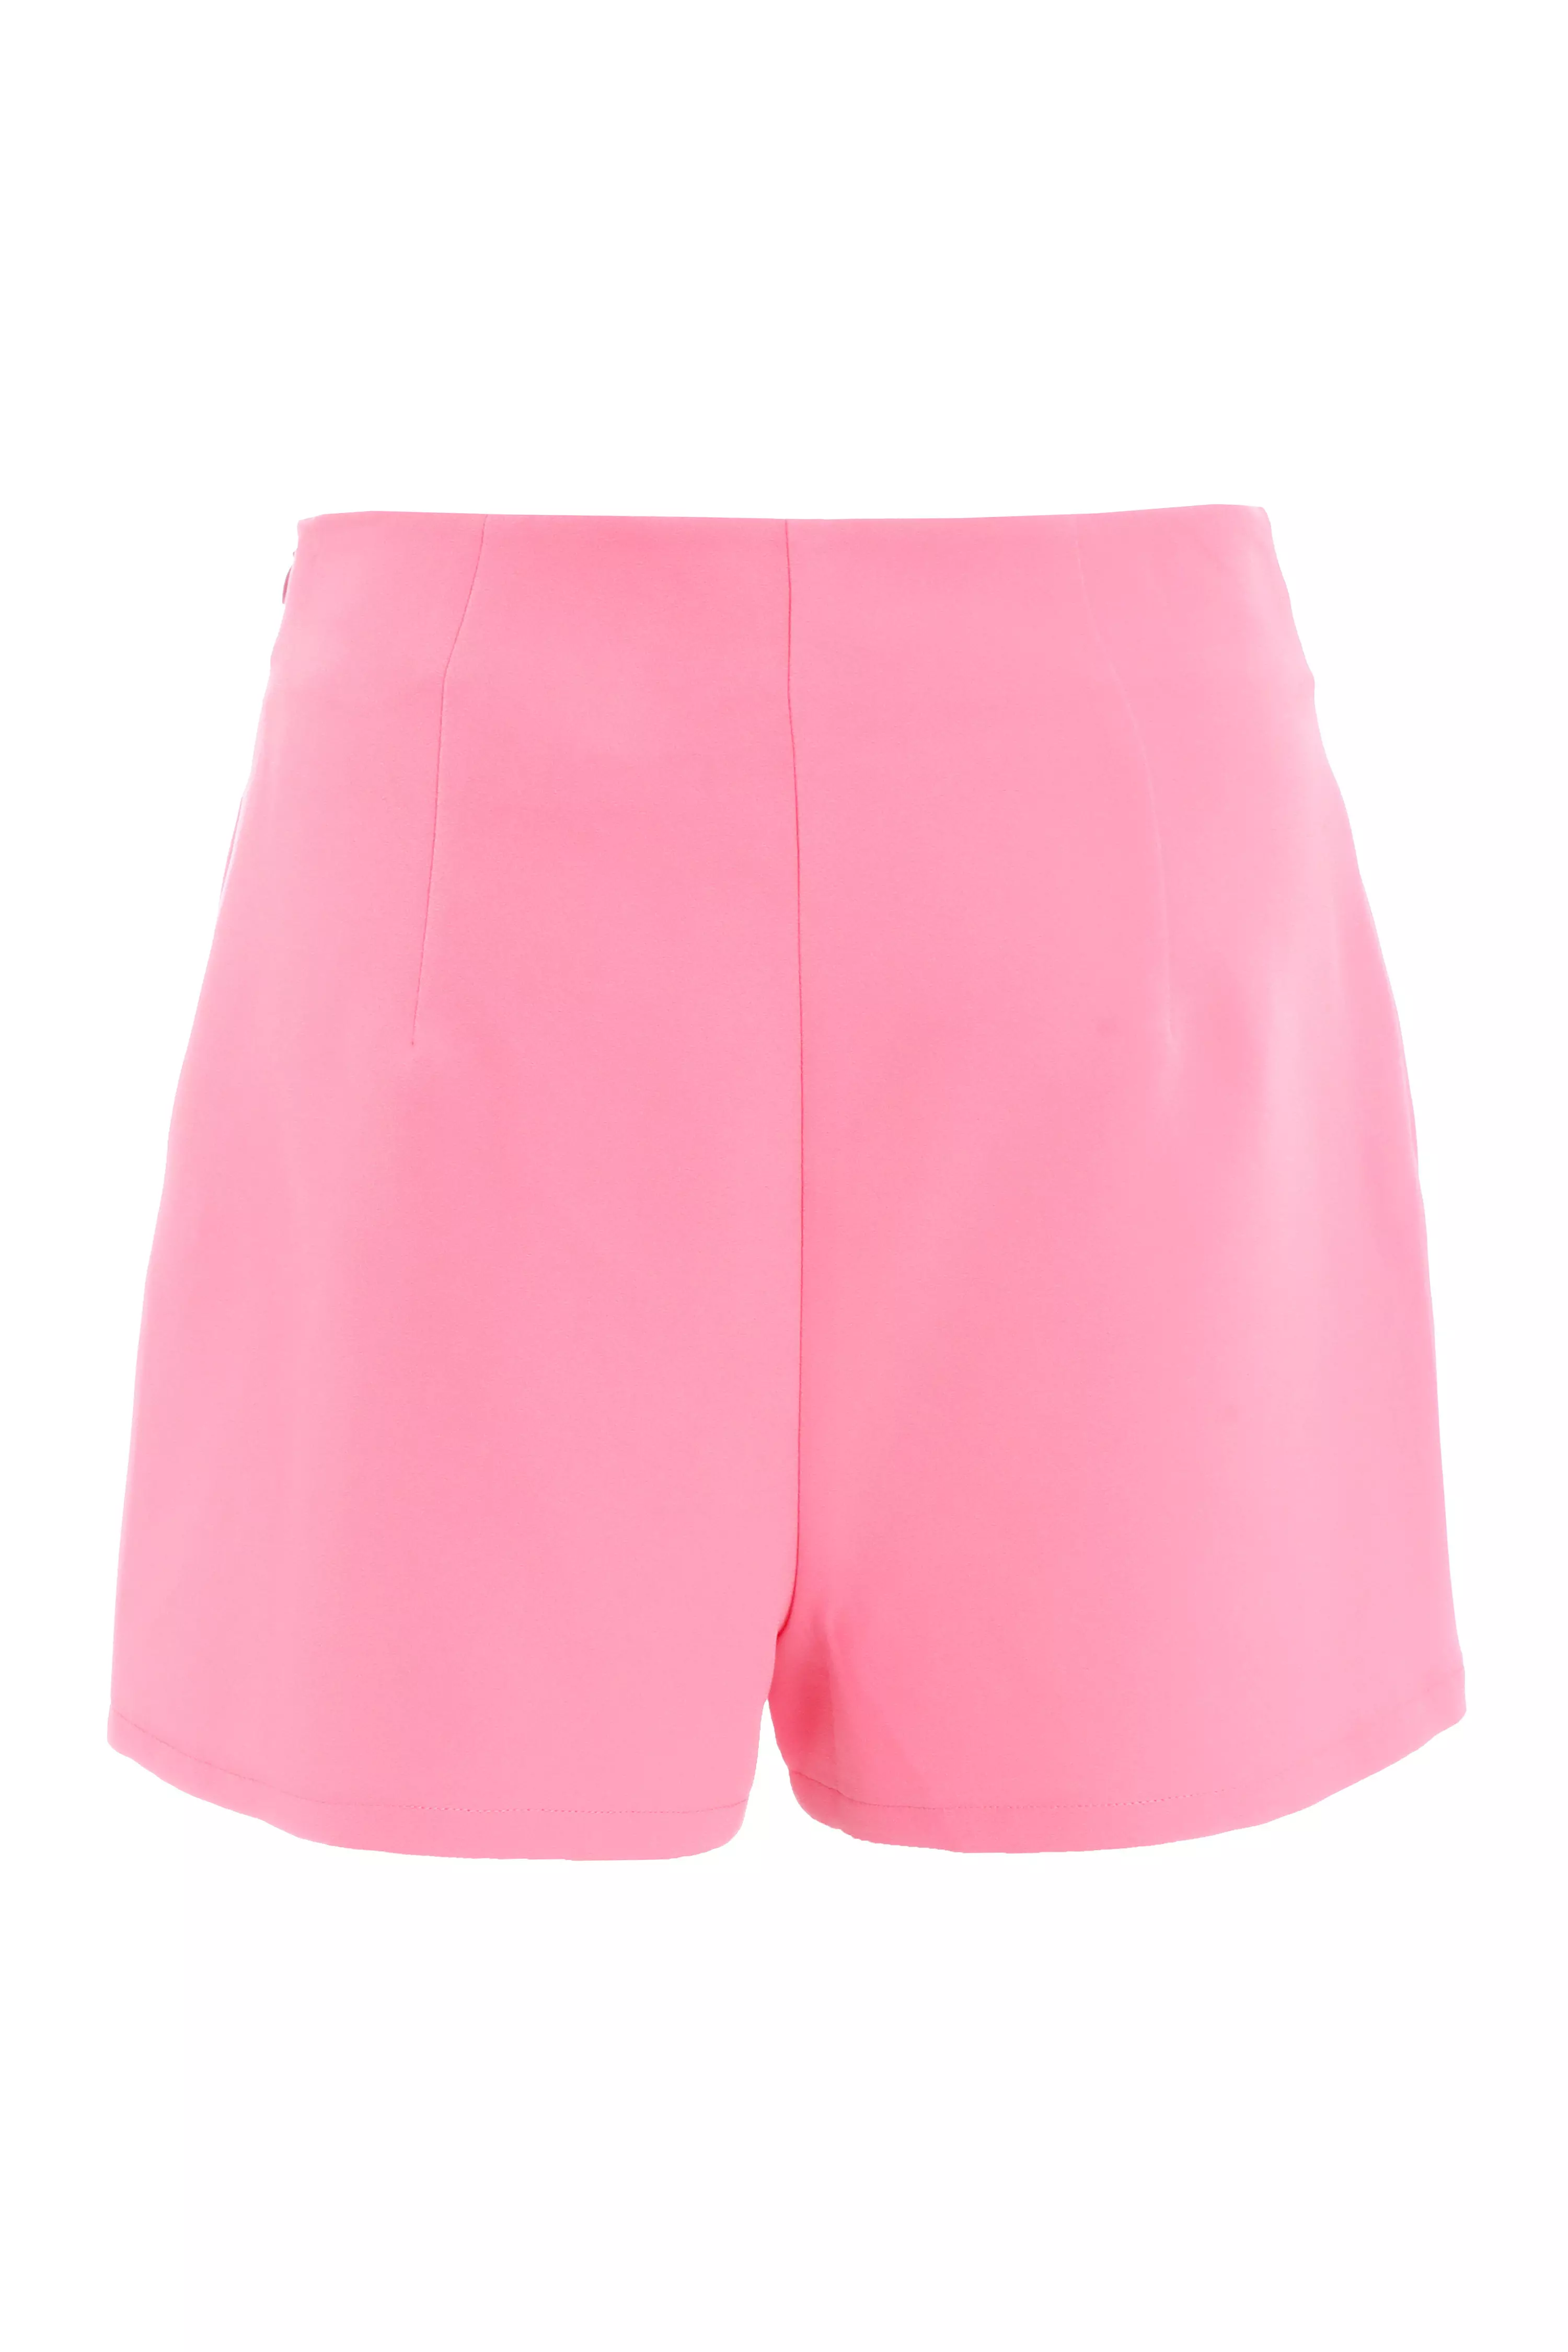 Pink Button Tailored Shorts